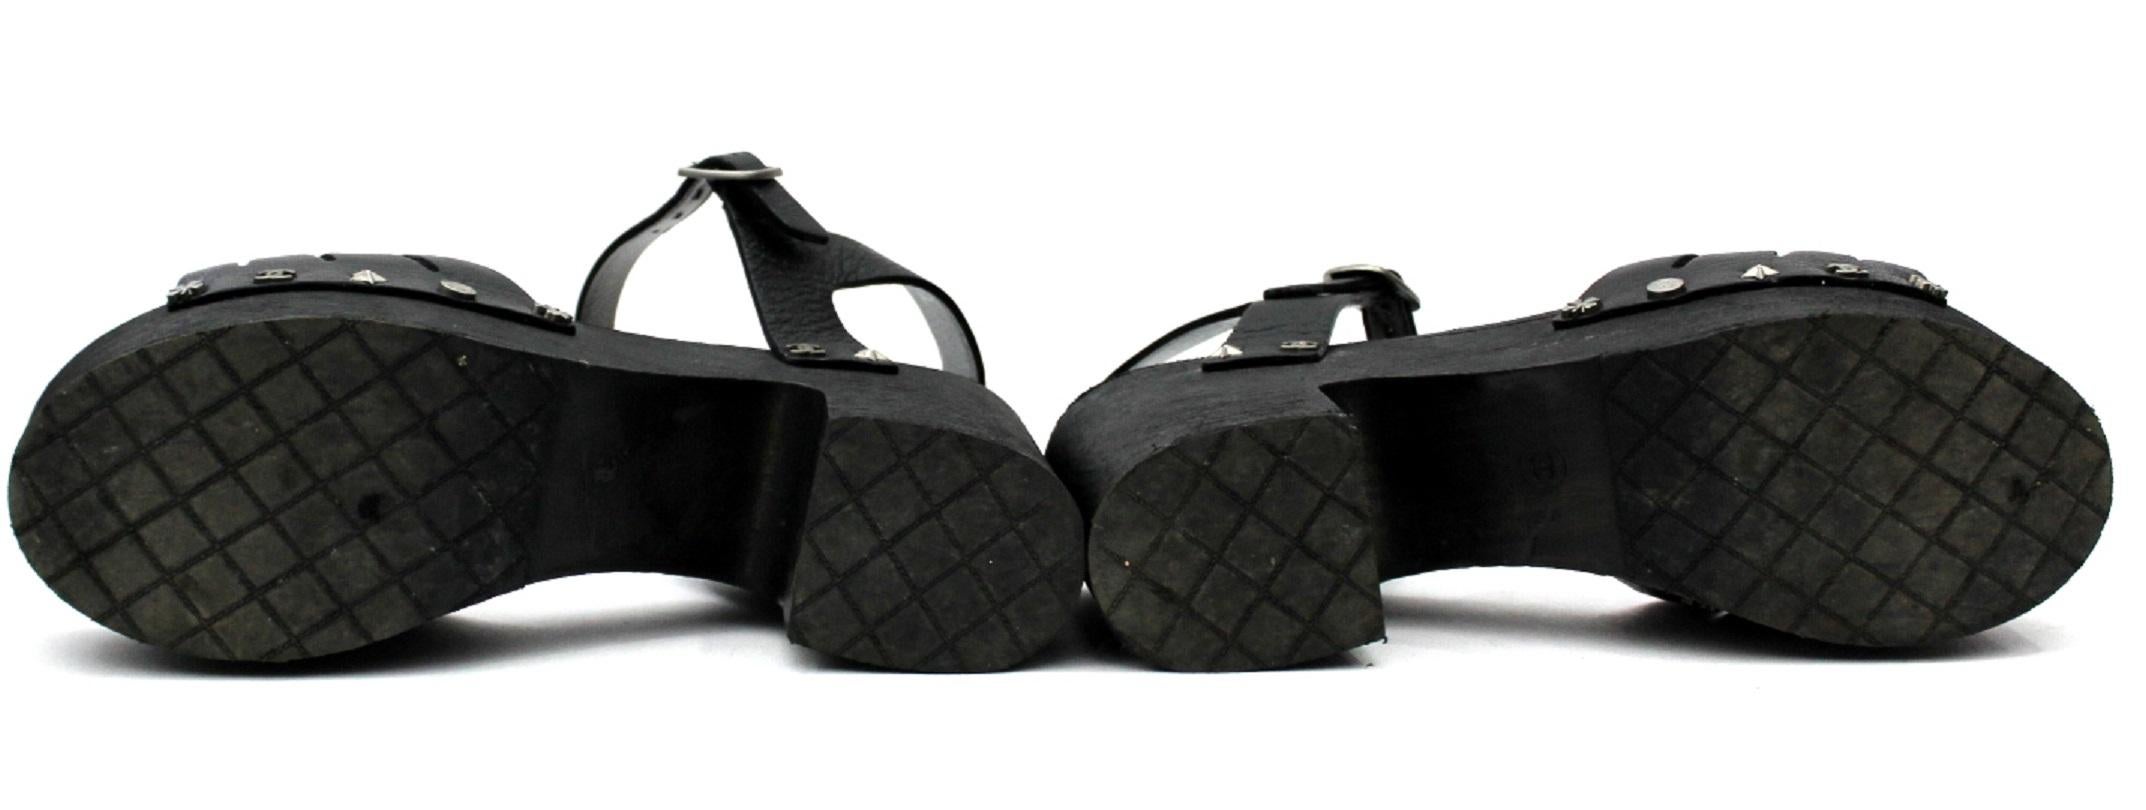 Chanel Black Leather Clogs 3